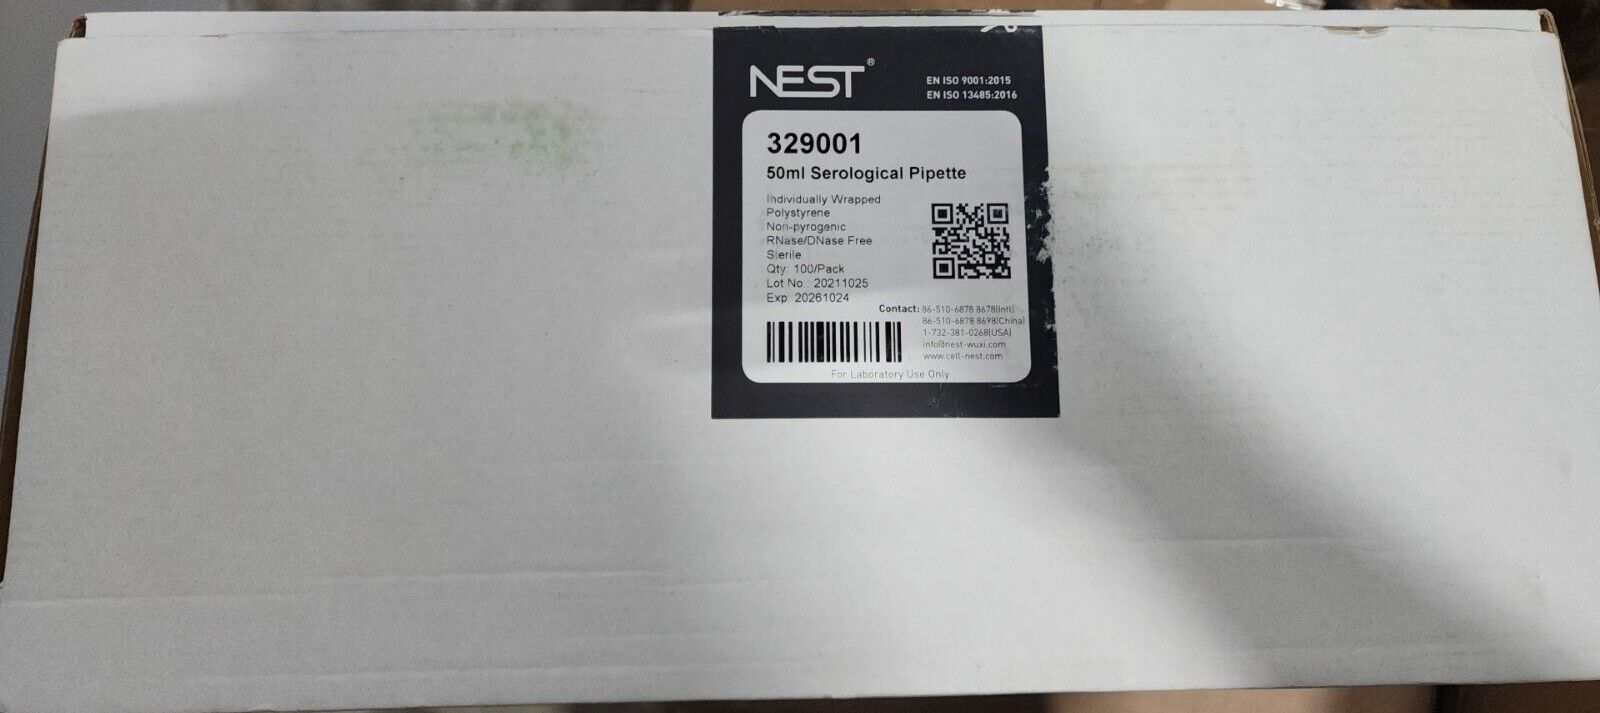 NEST 329001 Serological Pipettes 50ml Sterile Individually Wrapped - 100 Units